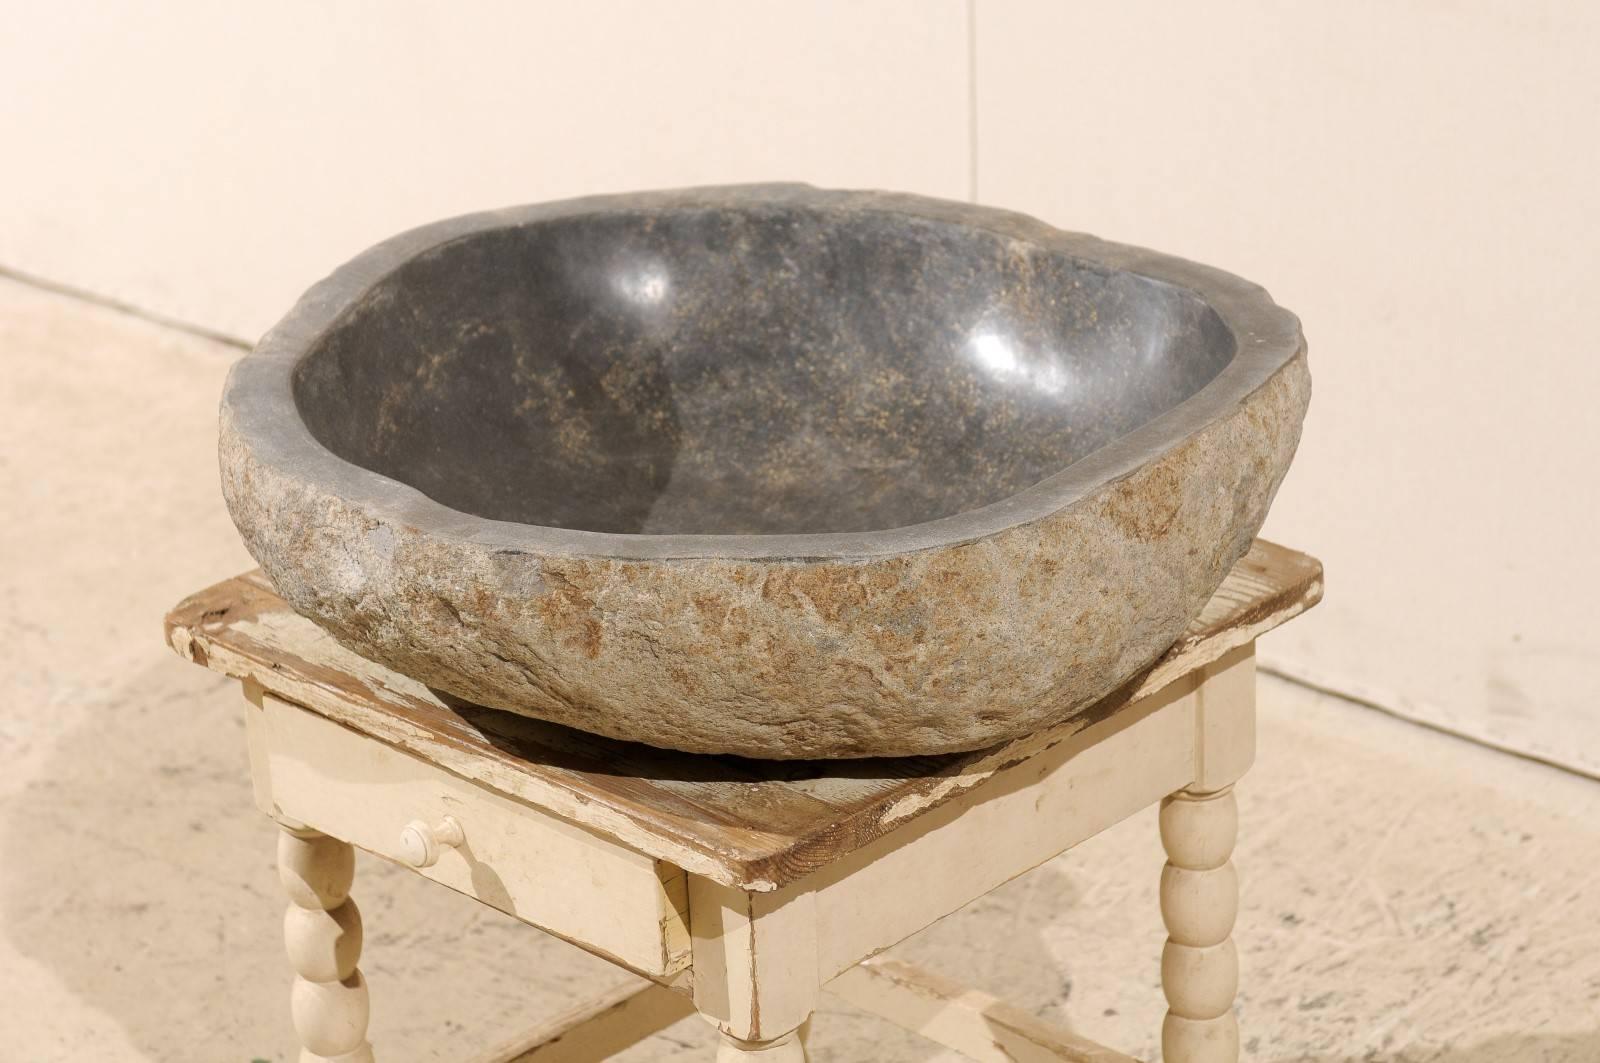 A river rock sink carved from a natural river rock boulder. This sink has a polished bowl with natural stone on the exterior. It is mostly a light grey color and tan on the outside and is more of a black tone towards the center. This piece would be